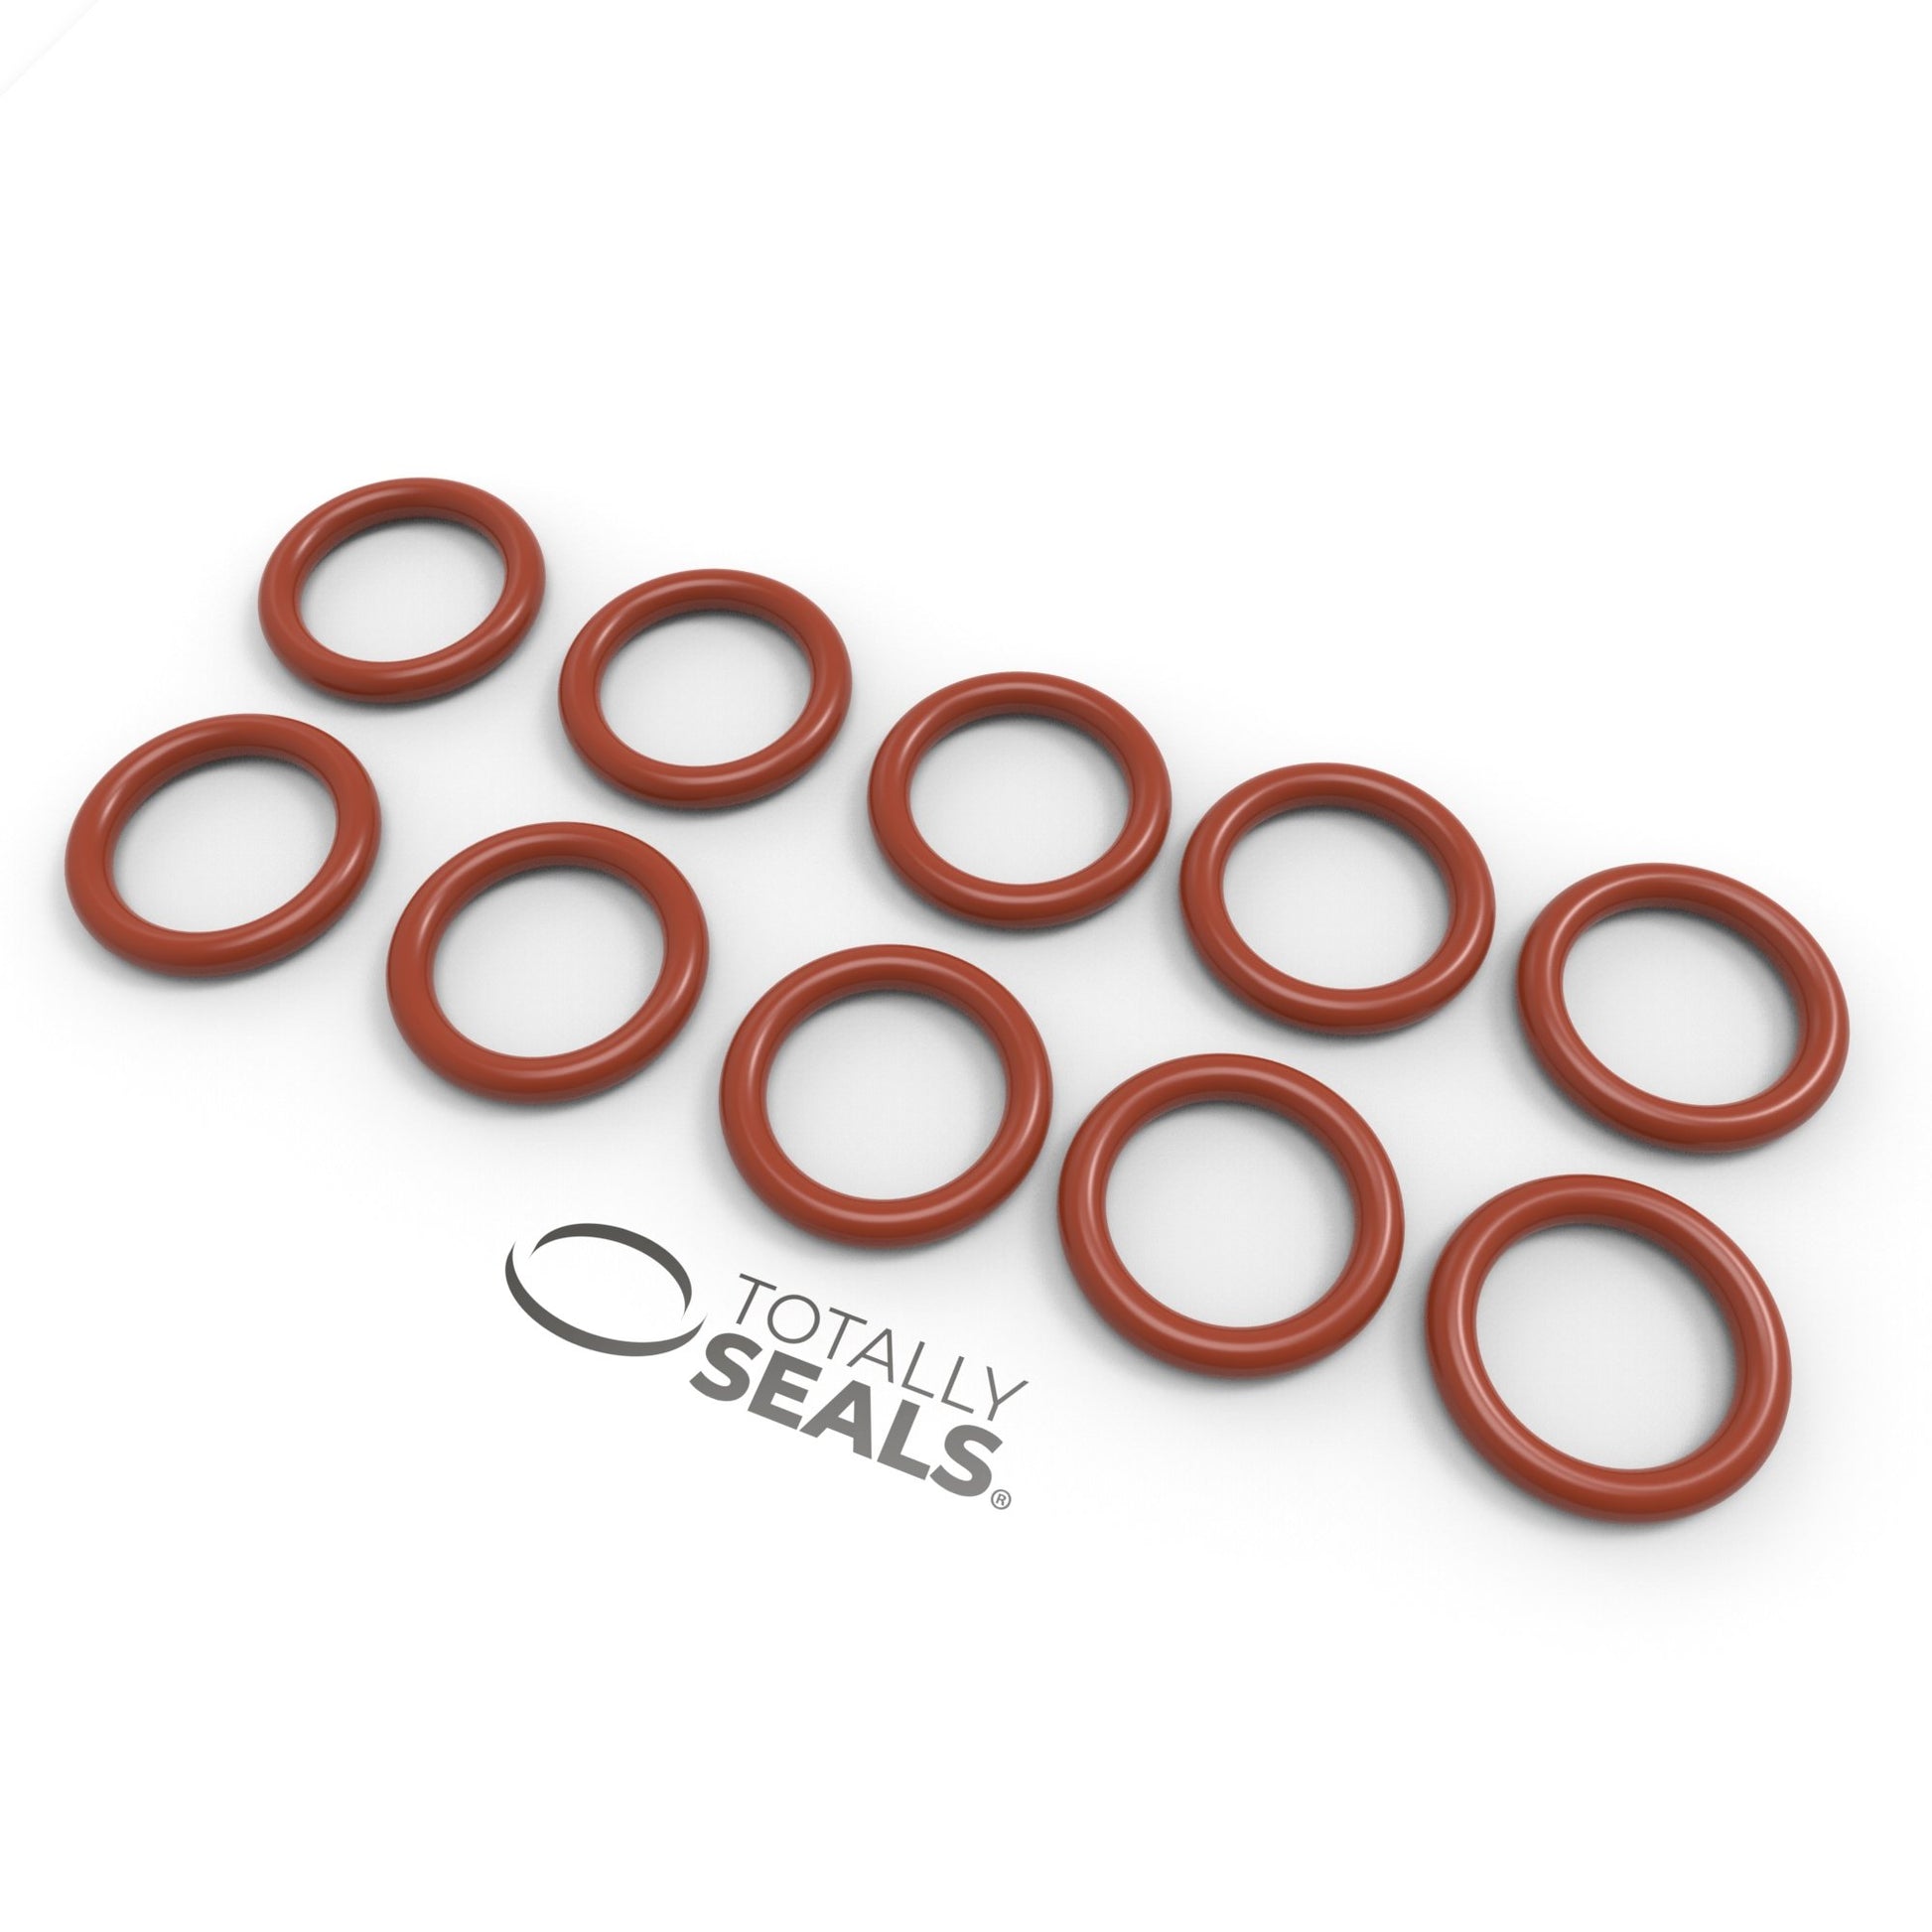 35mm x 3mm (41mm OD) Silicone O-Rings - Totally Seals®